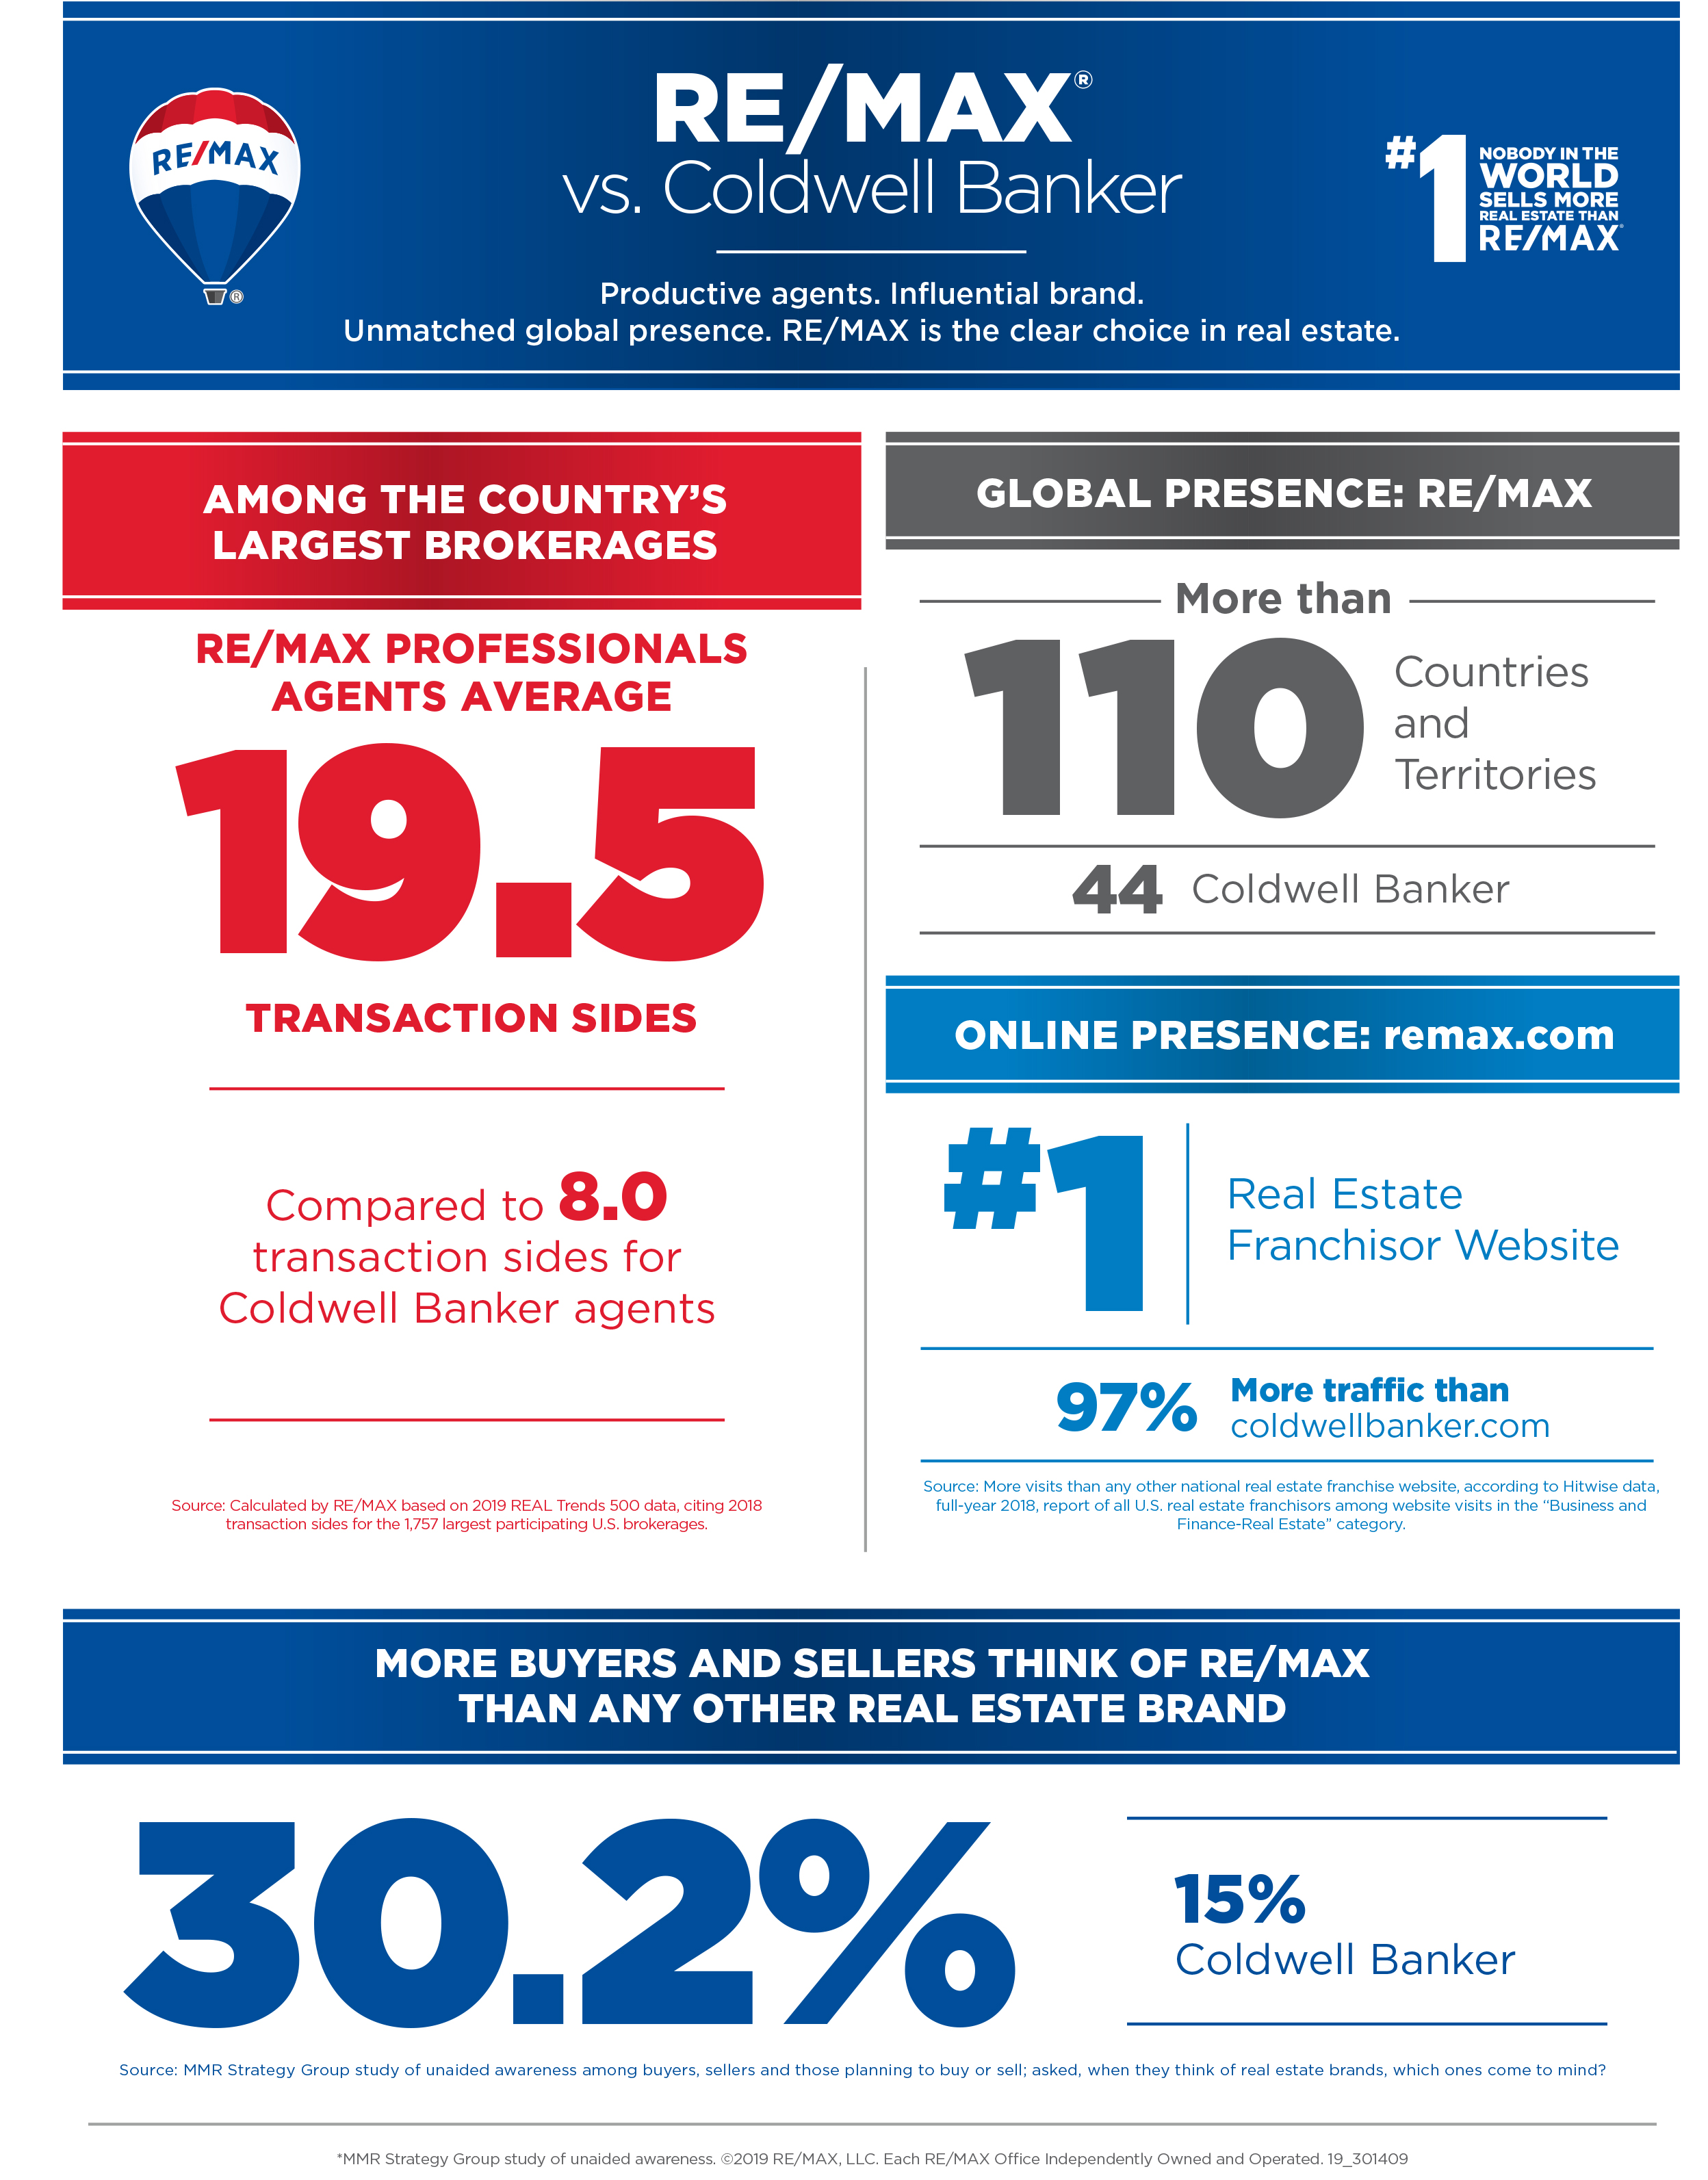 Remax vs Coldwell Banker